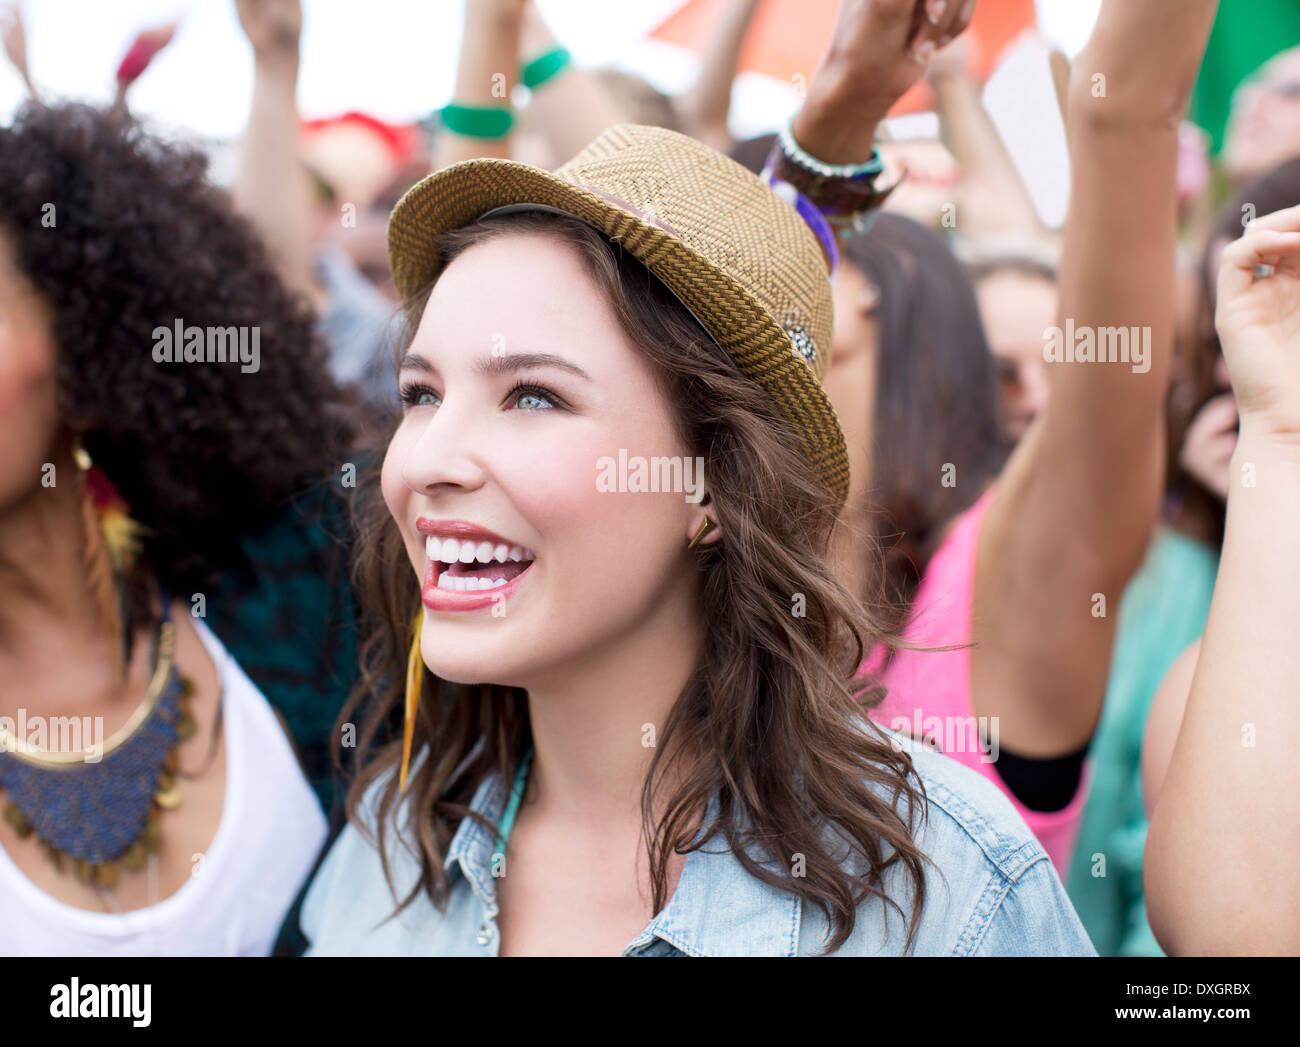 Happy woman at music festival Stock Photo